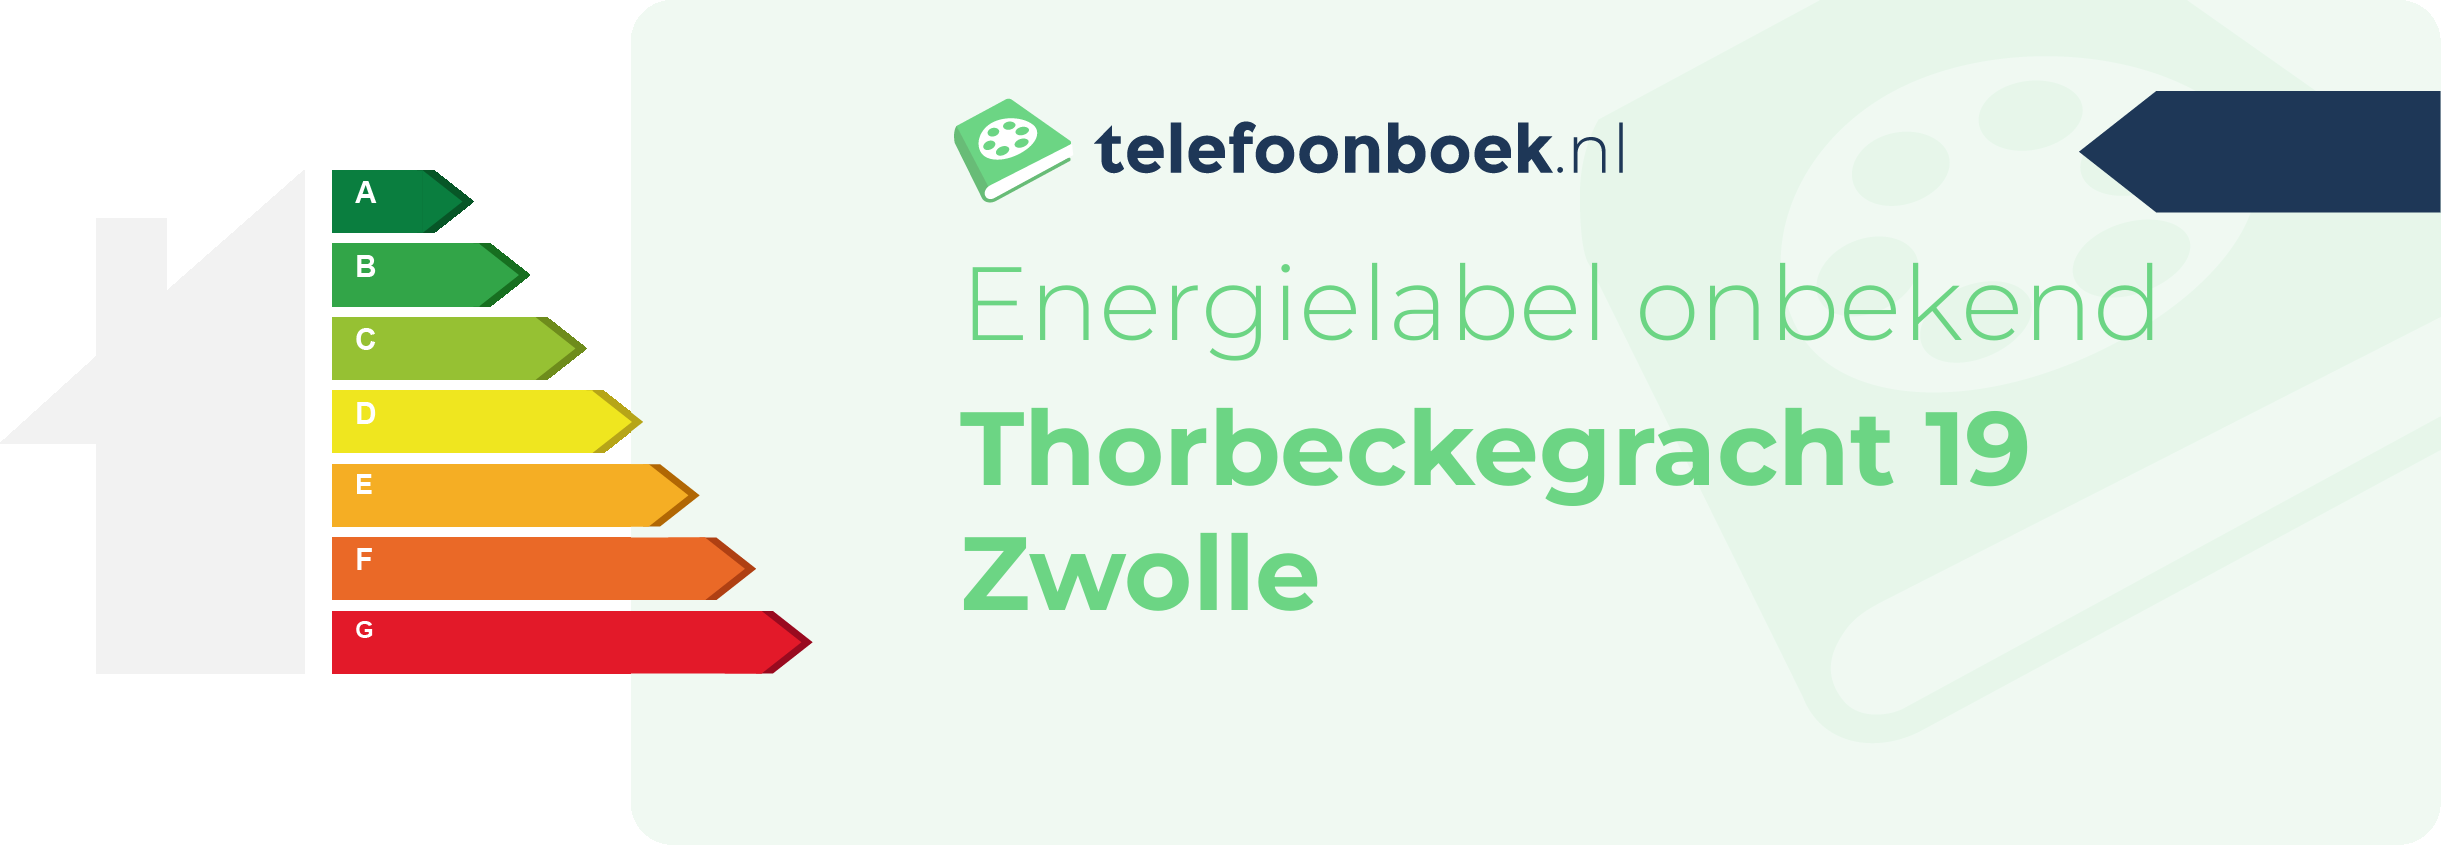 Energielabel Thorbeckegracht 19 Zwolle